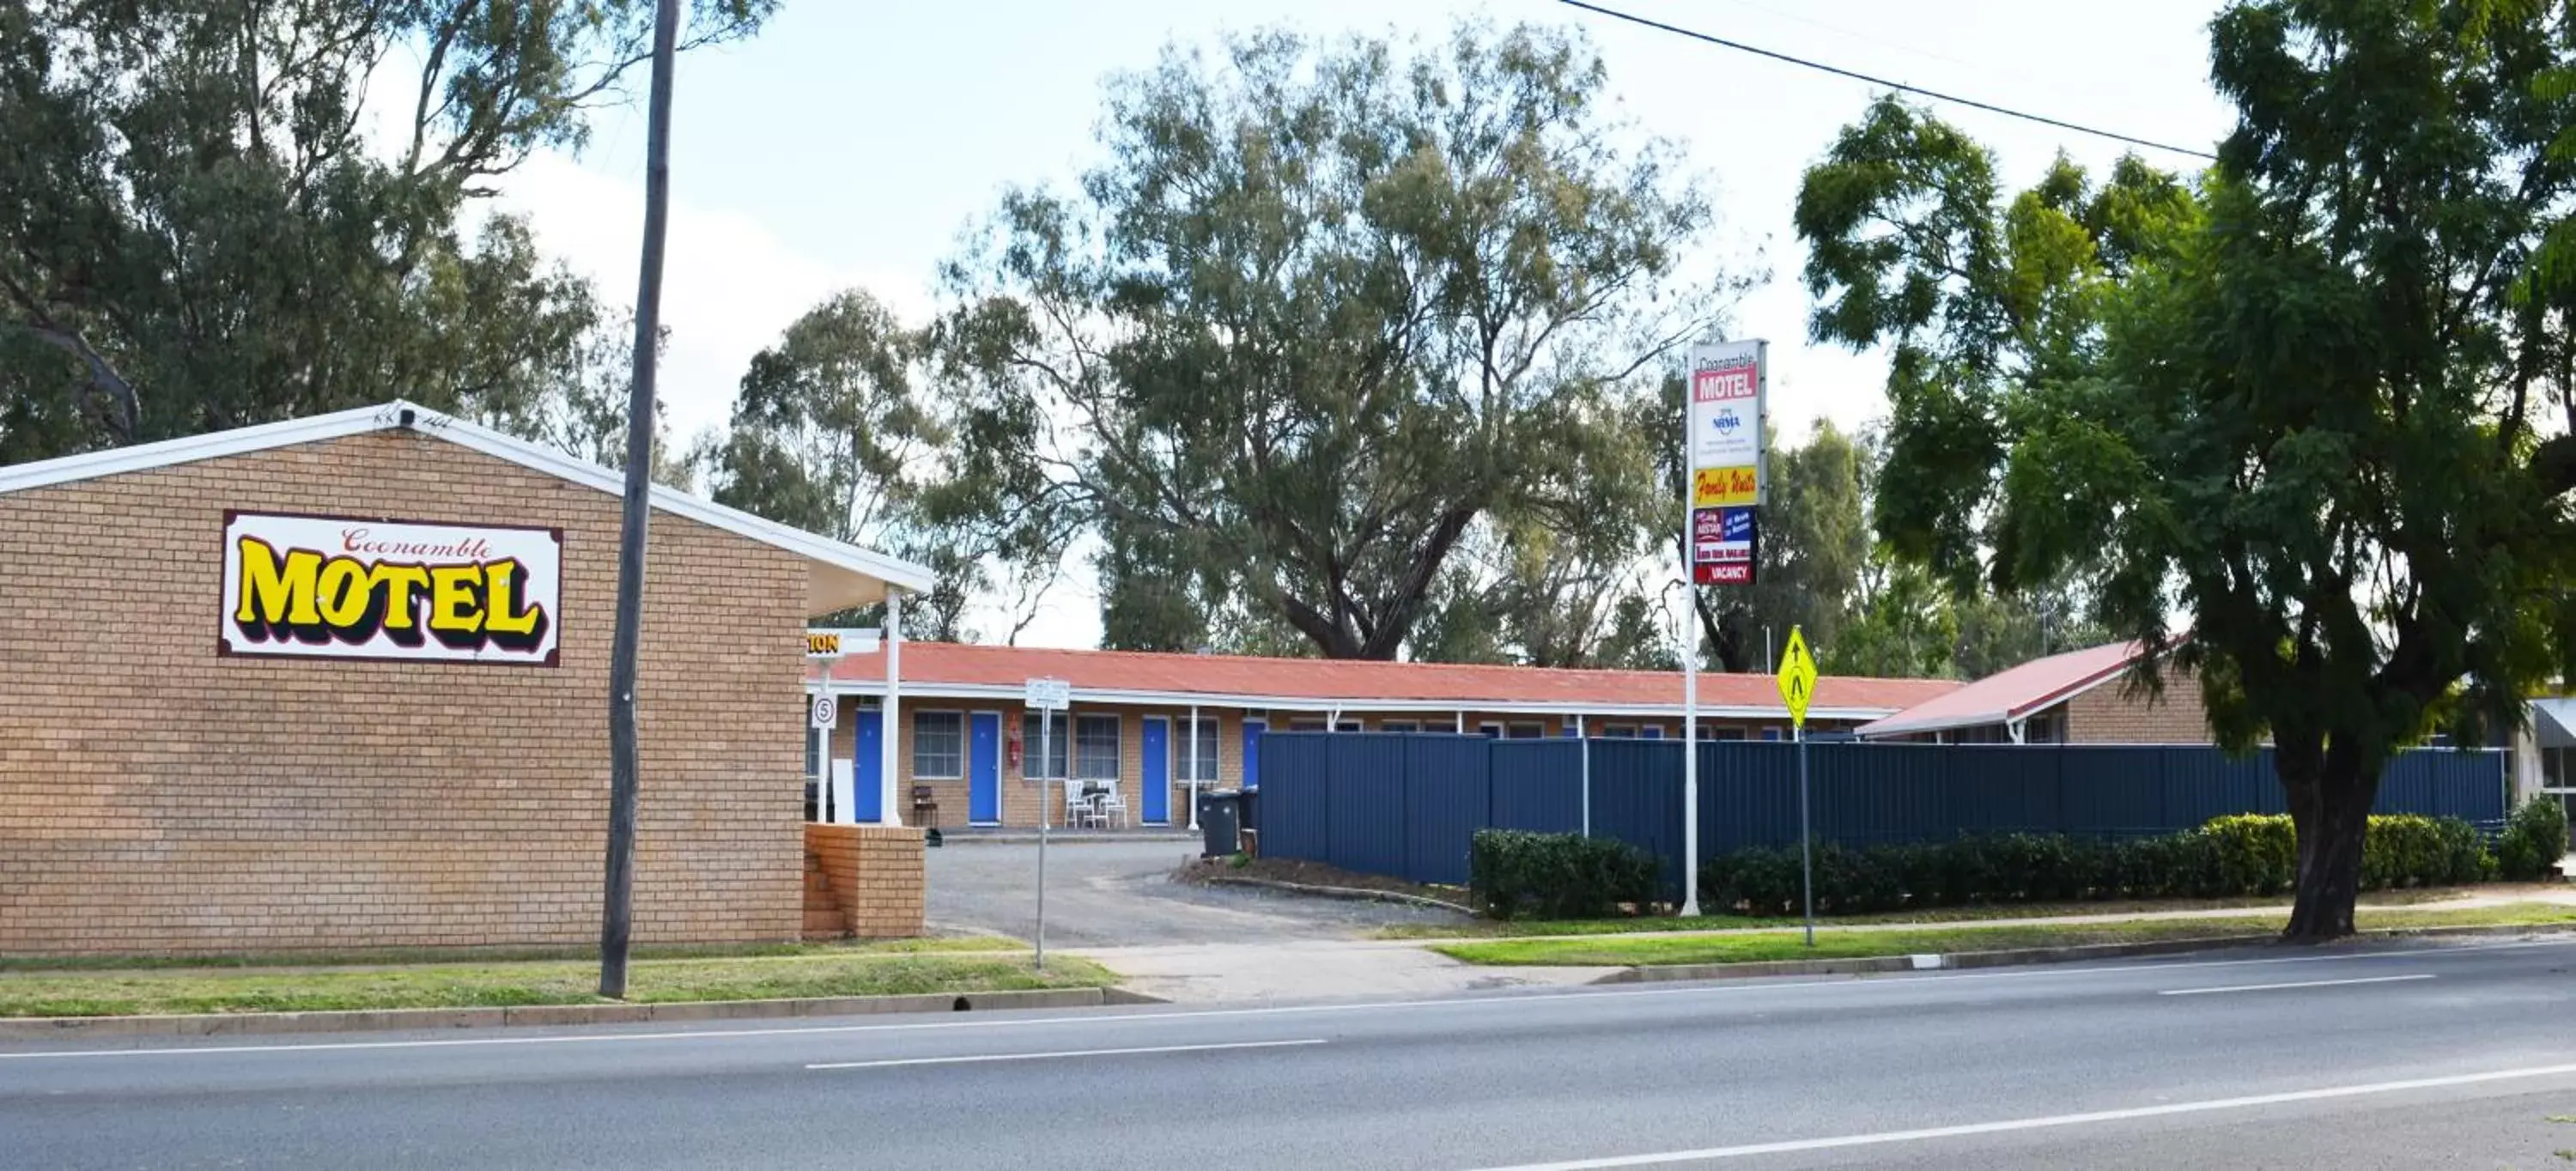 Property Building in Coonamble Motel